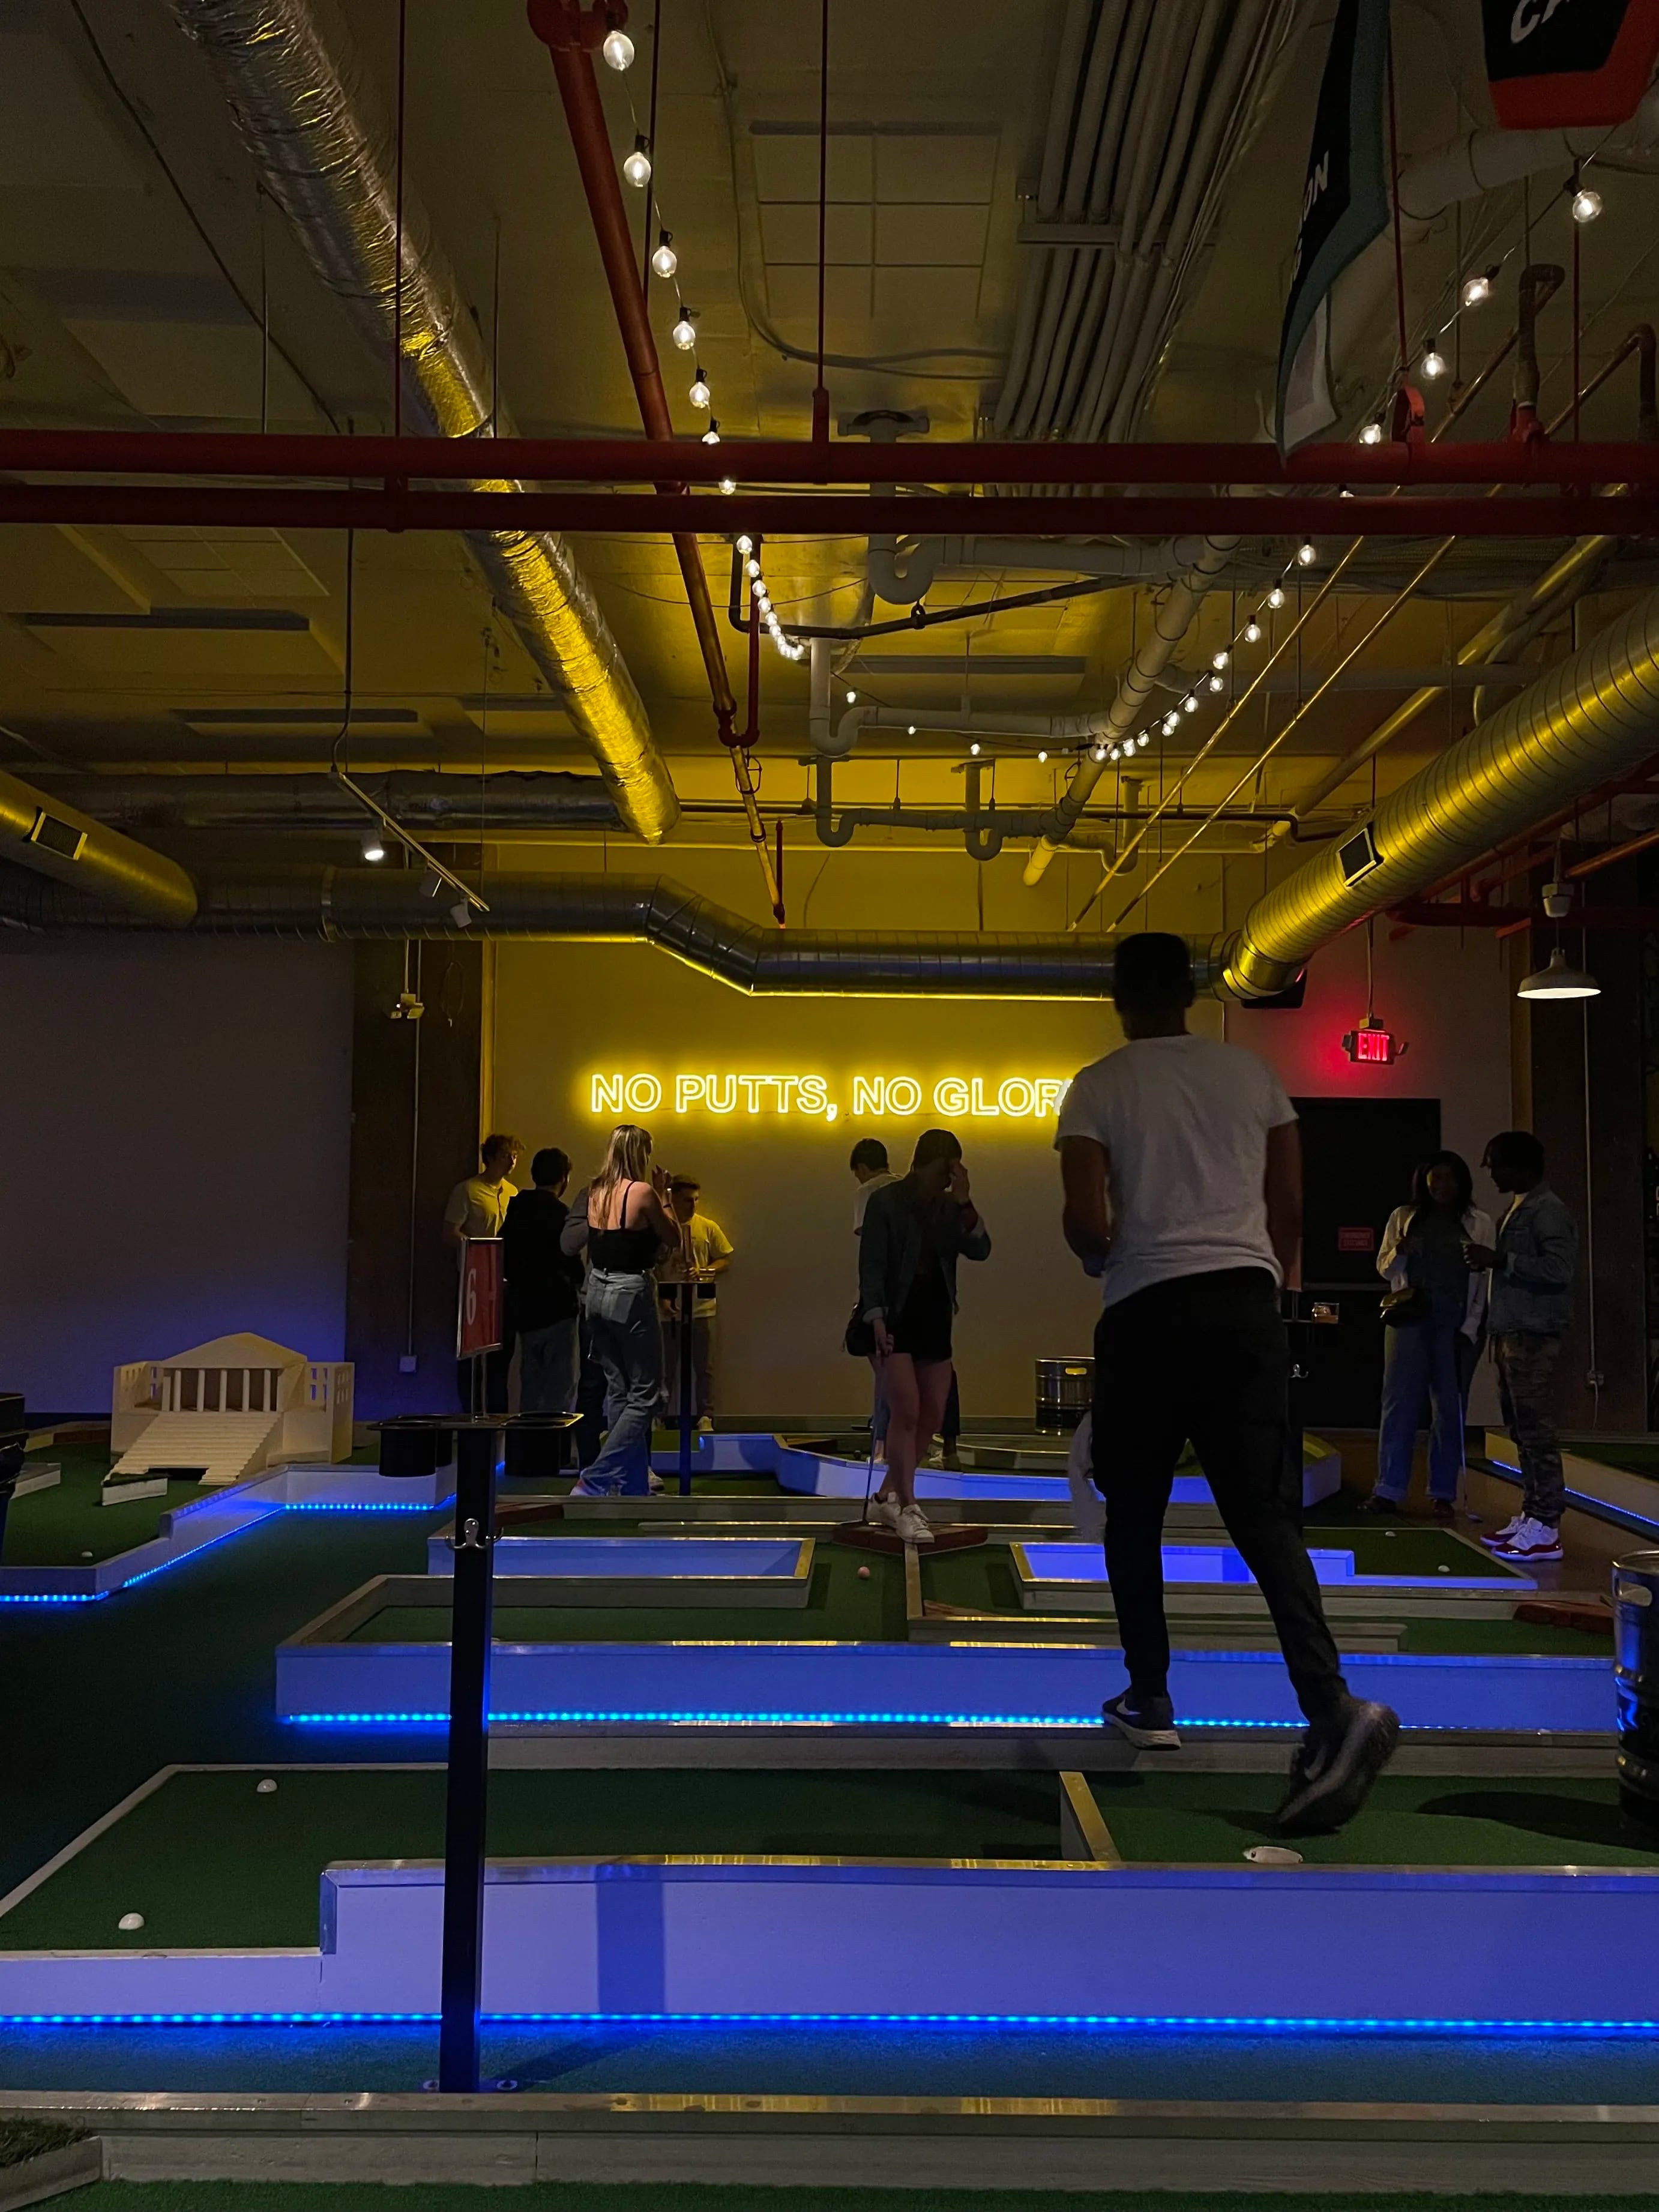 At Libertee Grounds, you can drink hyper local beers and play mini golf.